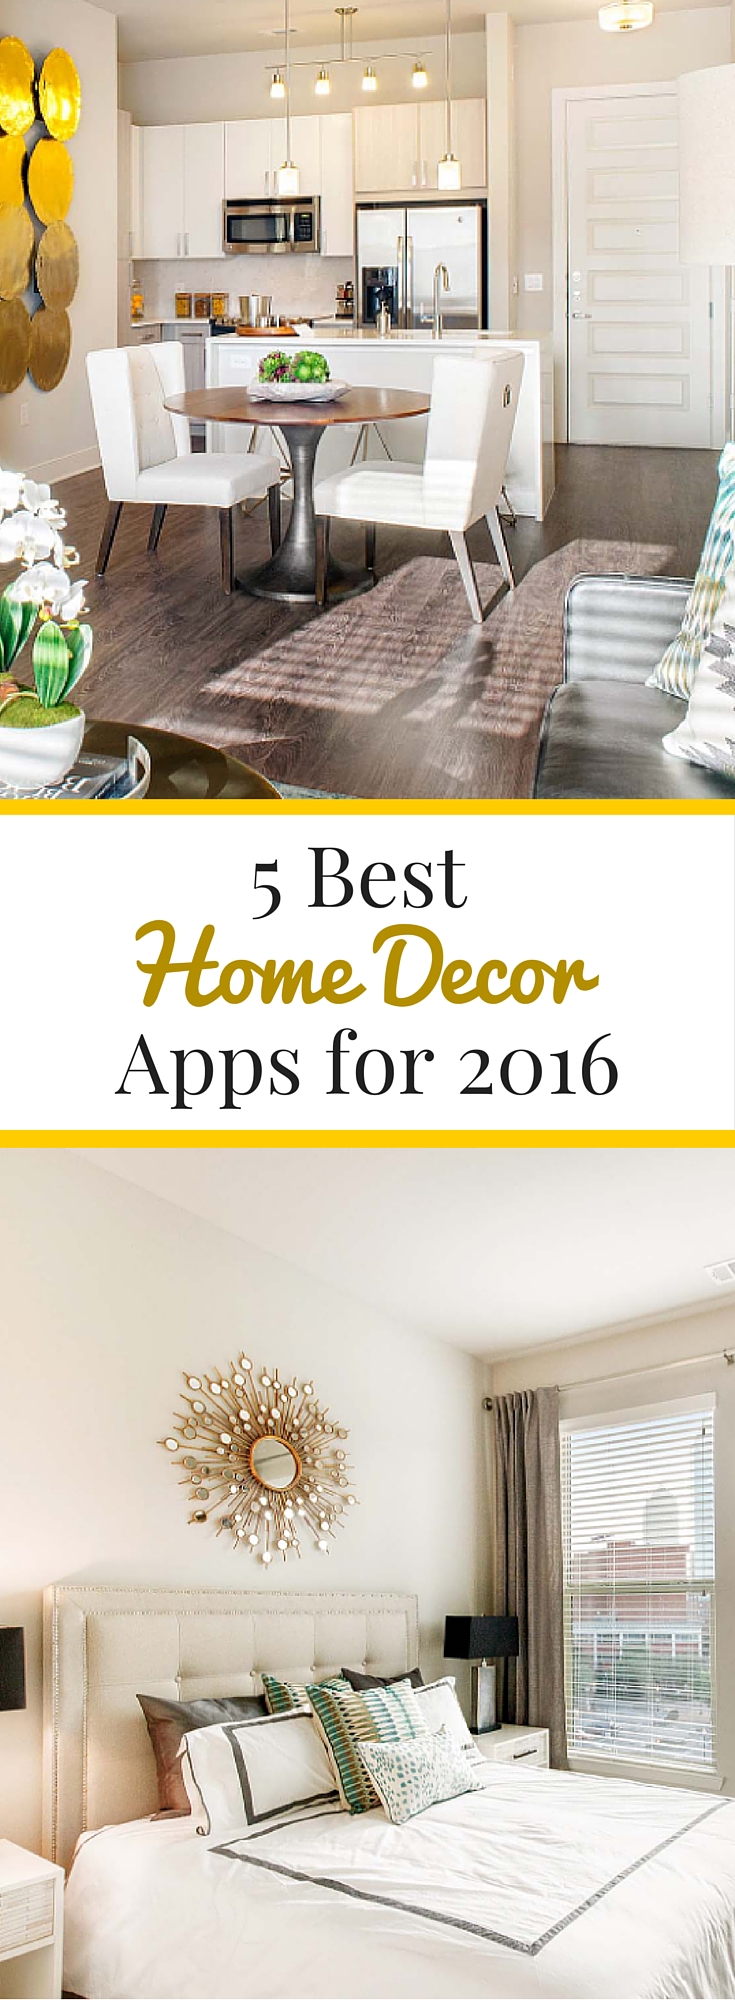 So ready to decorate after reading about these home decor apps. Had no idea they existed!! Especially am interested in the "Like That Decor" app, had never heard of that one before and it's super useful.